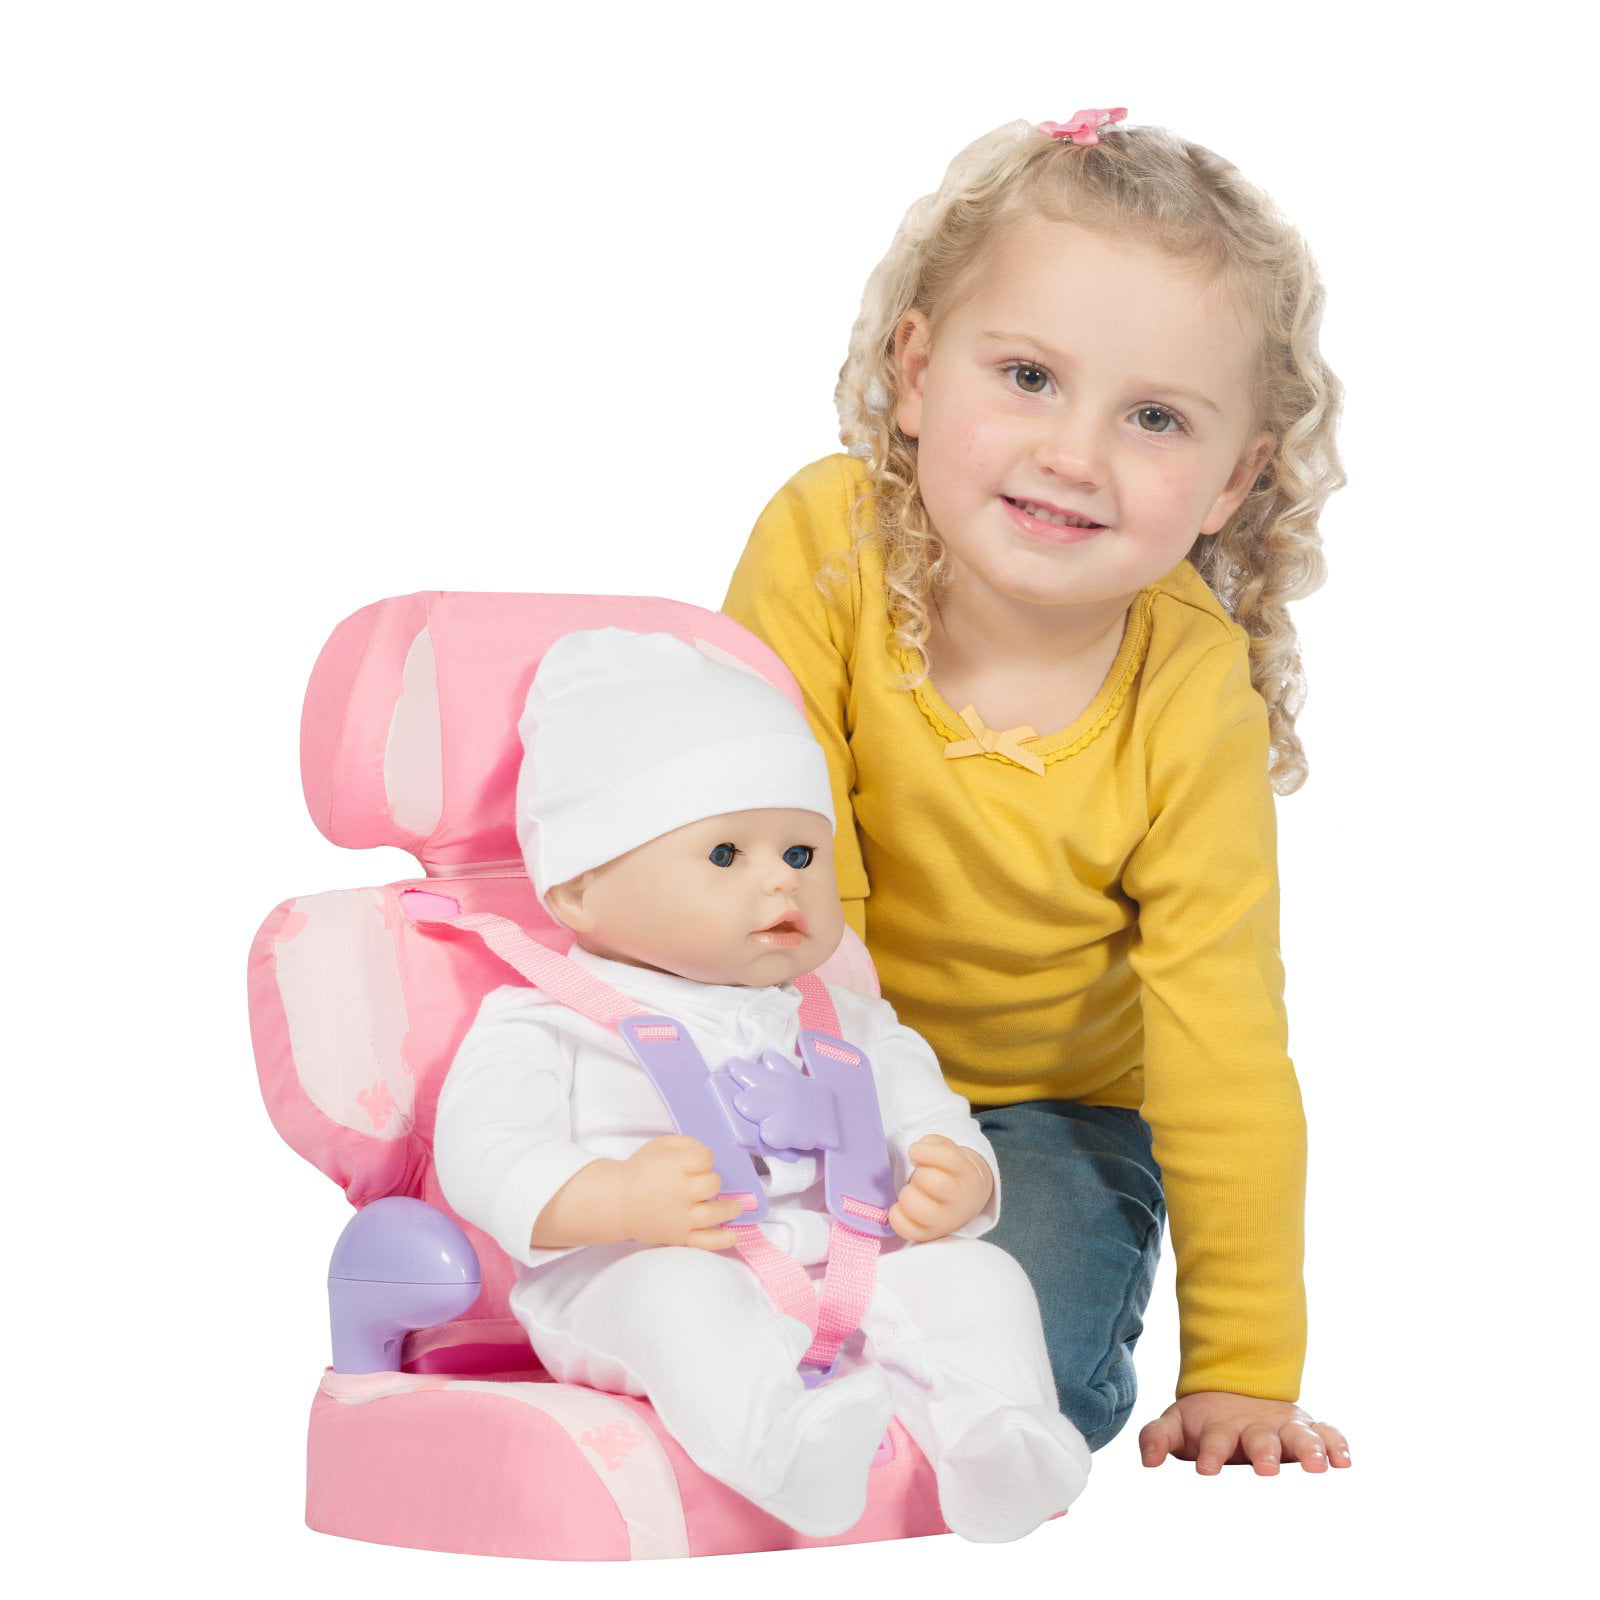 Casdon Baby Huggles Doll Car Booster Seat Pink For Dolls Up To 46cm 